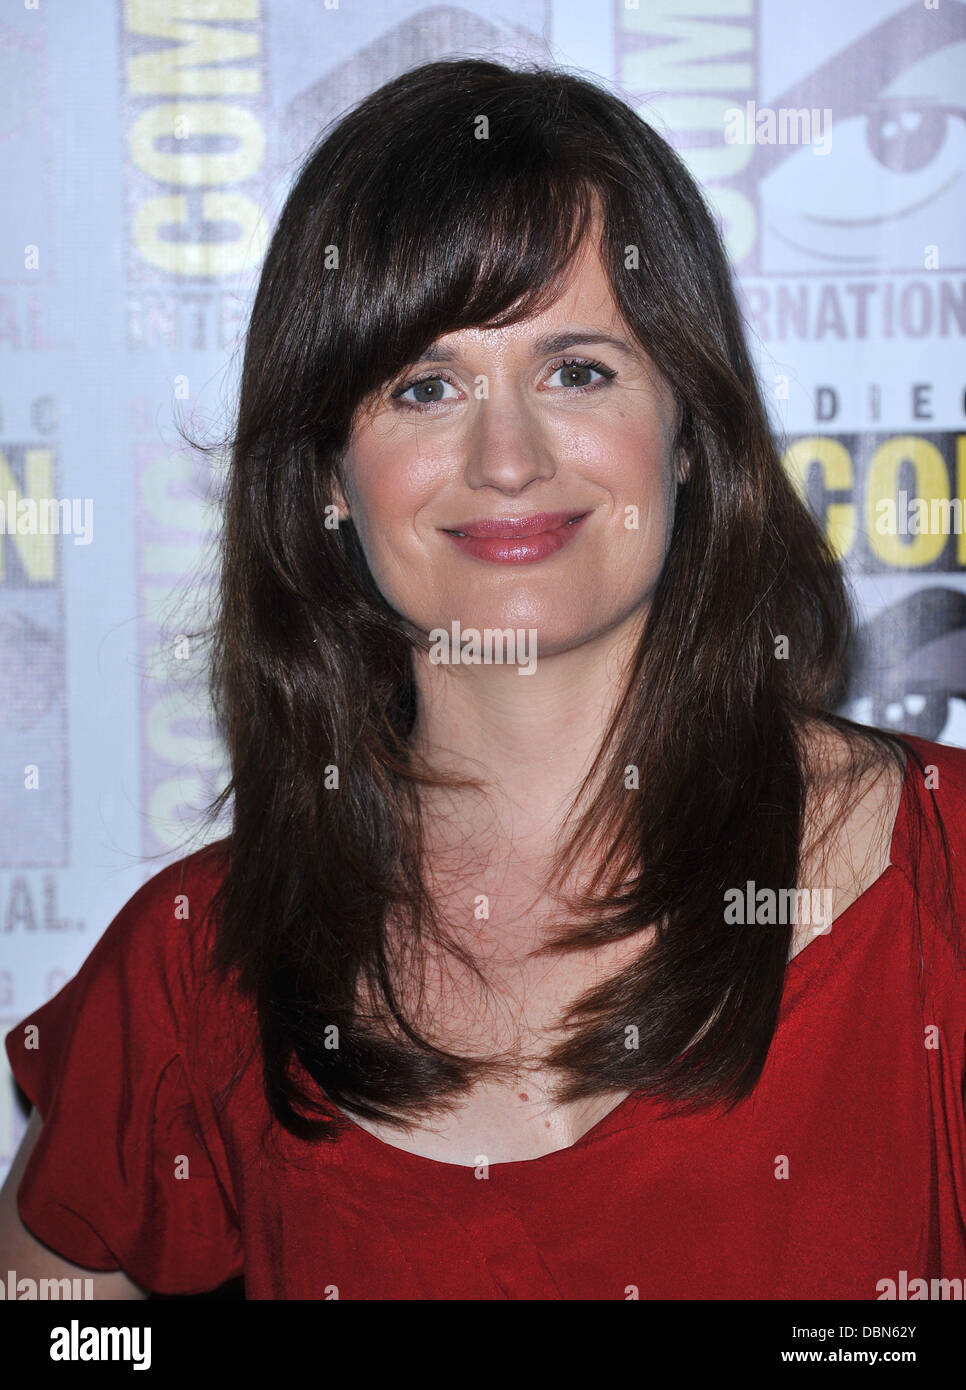 Elizabeth Reaser Comic-Con 2011 - Day 1 - 'Twilight: Breaking Dawn Part 1' press conference held at the Hilton Bayfront Hotel - Arrivals    San Diego, California - 21.07.11 Stock Photo